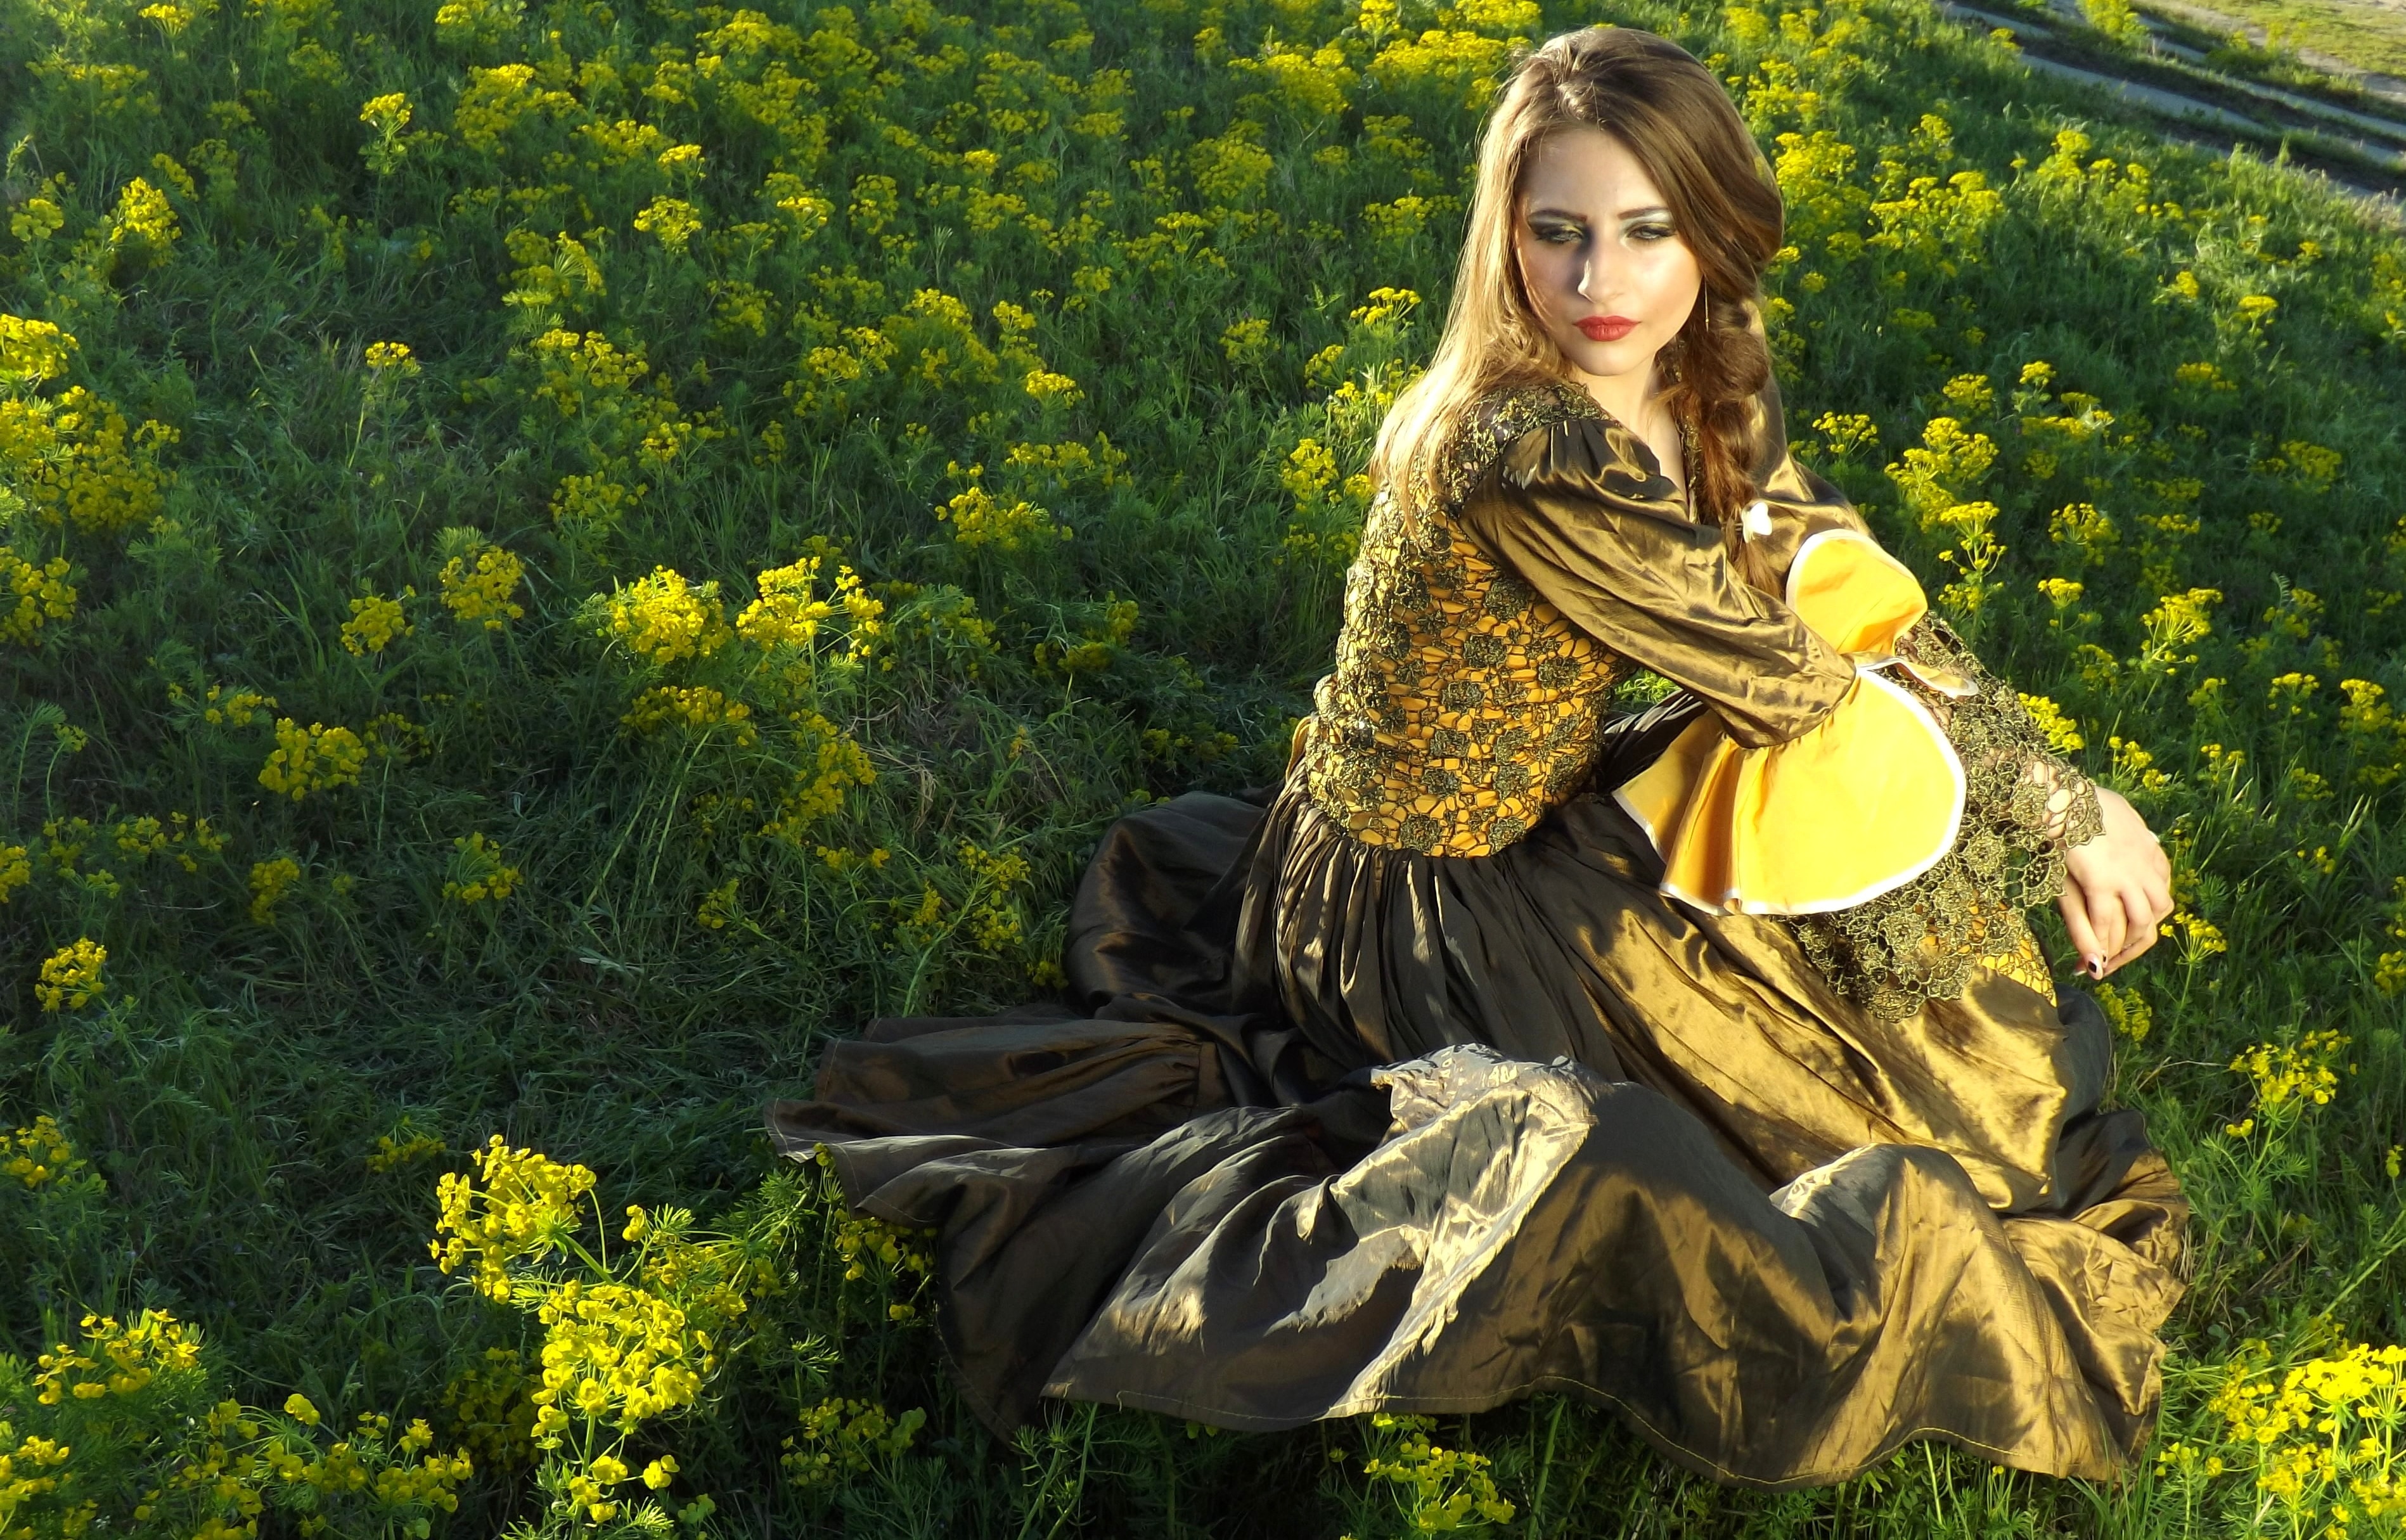 women's yellow green long dress outfit free image | Peakpx